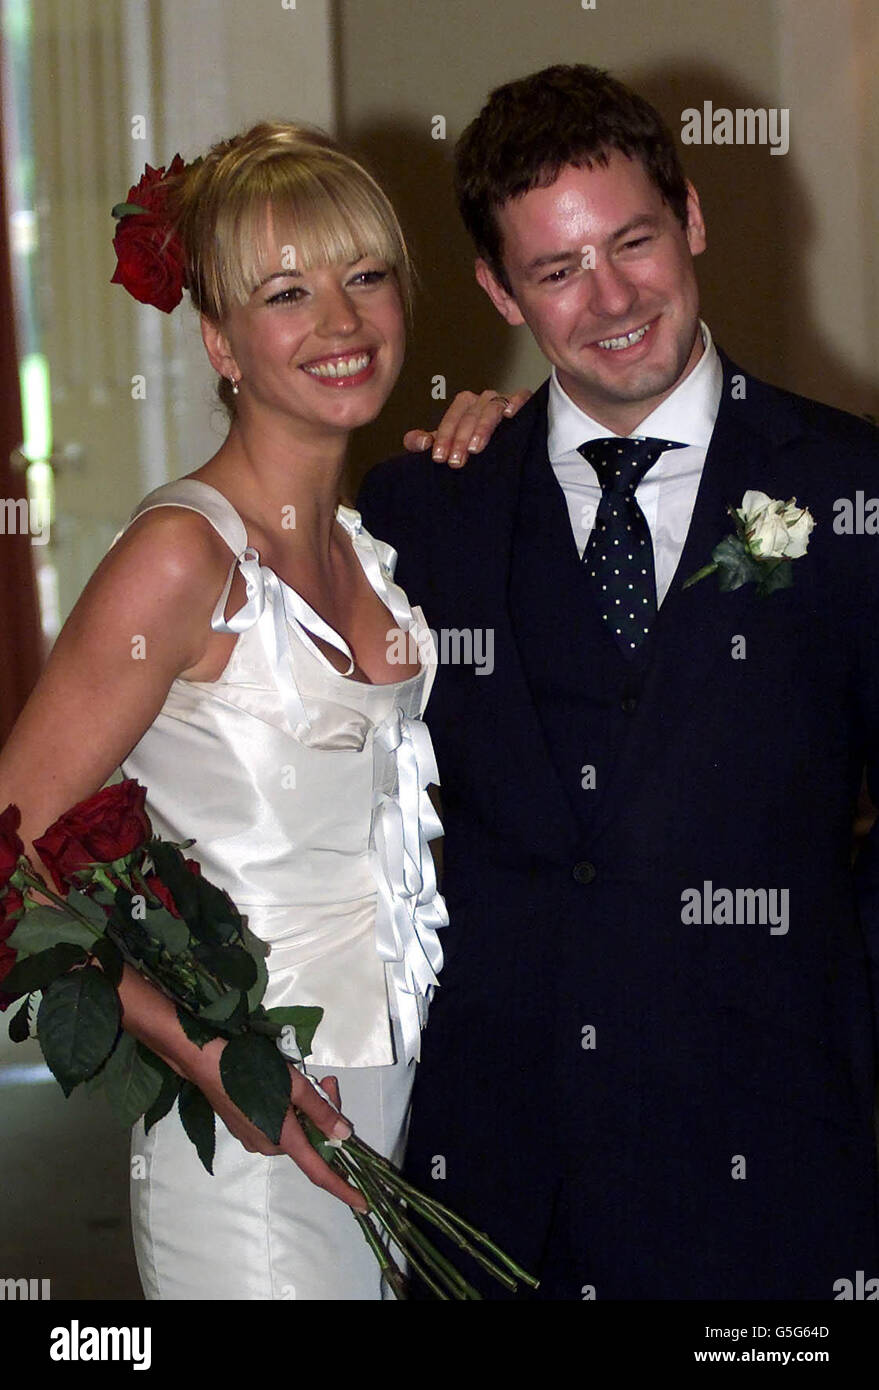 BBC Radio 1 Breakfast Show host Sara Cox went to the rain-whipped hills of Co. Wicklow, Ireland. to have her marriage to DJ sweetheart Jon Carter blessed. The couple walked down the aisle at a ceremony in the tiny village of Macreddin. *- two days after their civil marriage in a London register office. Stock Photo